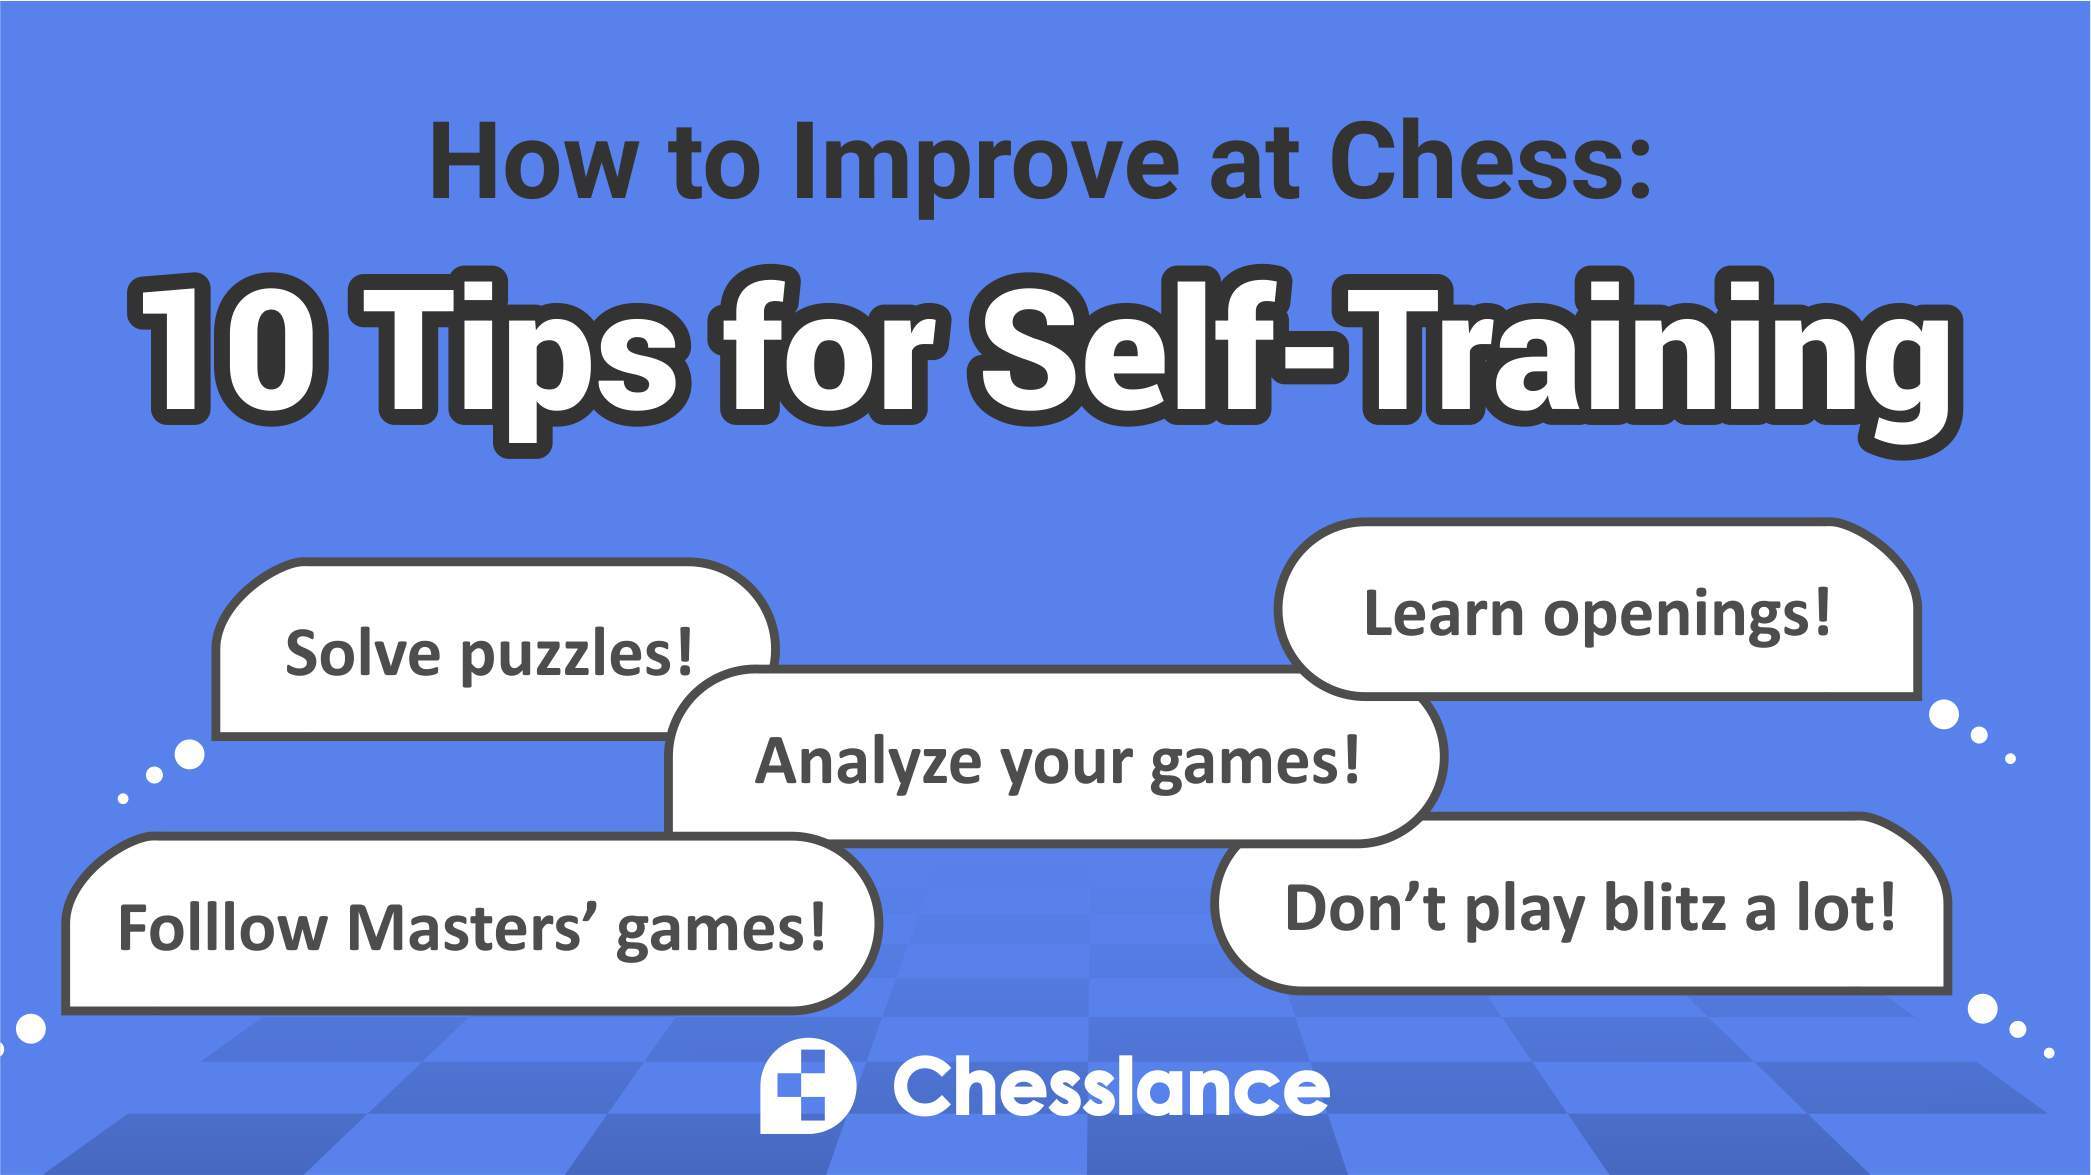 How to improve at chess: 10 Tips for Self-Training